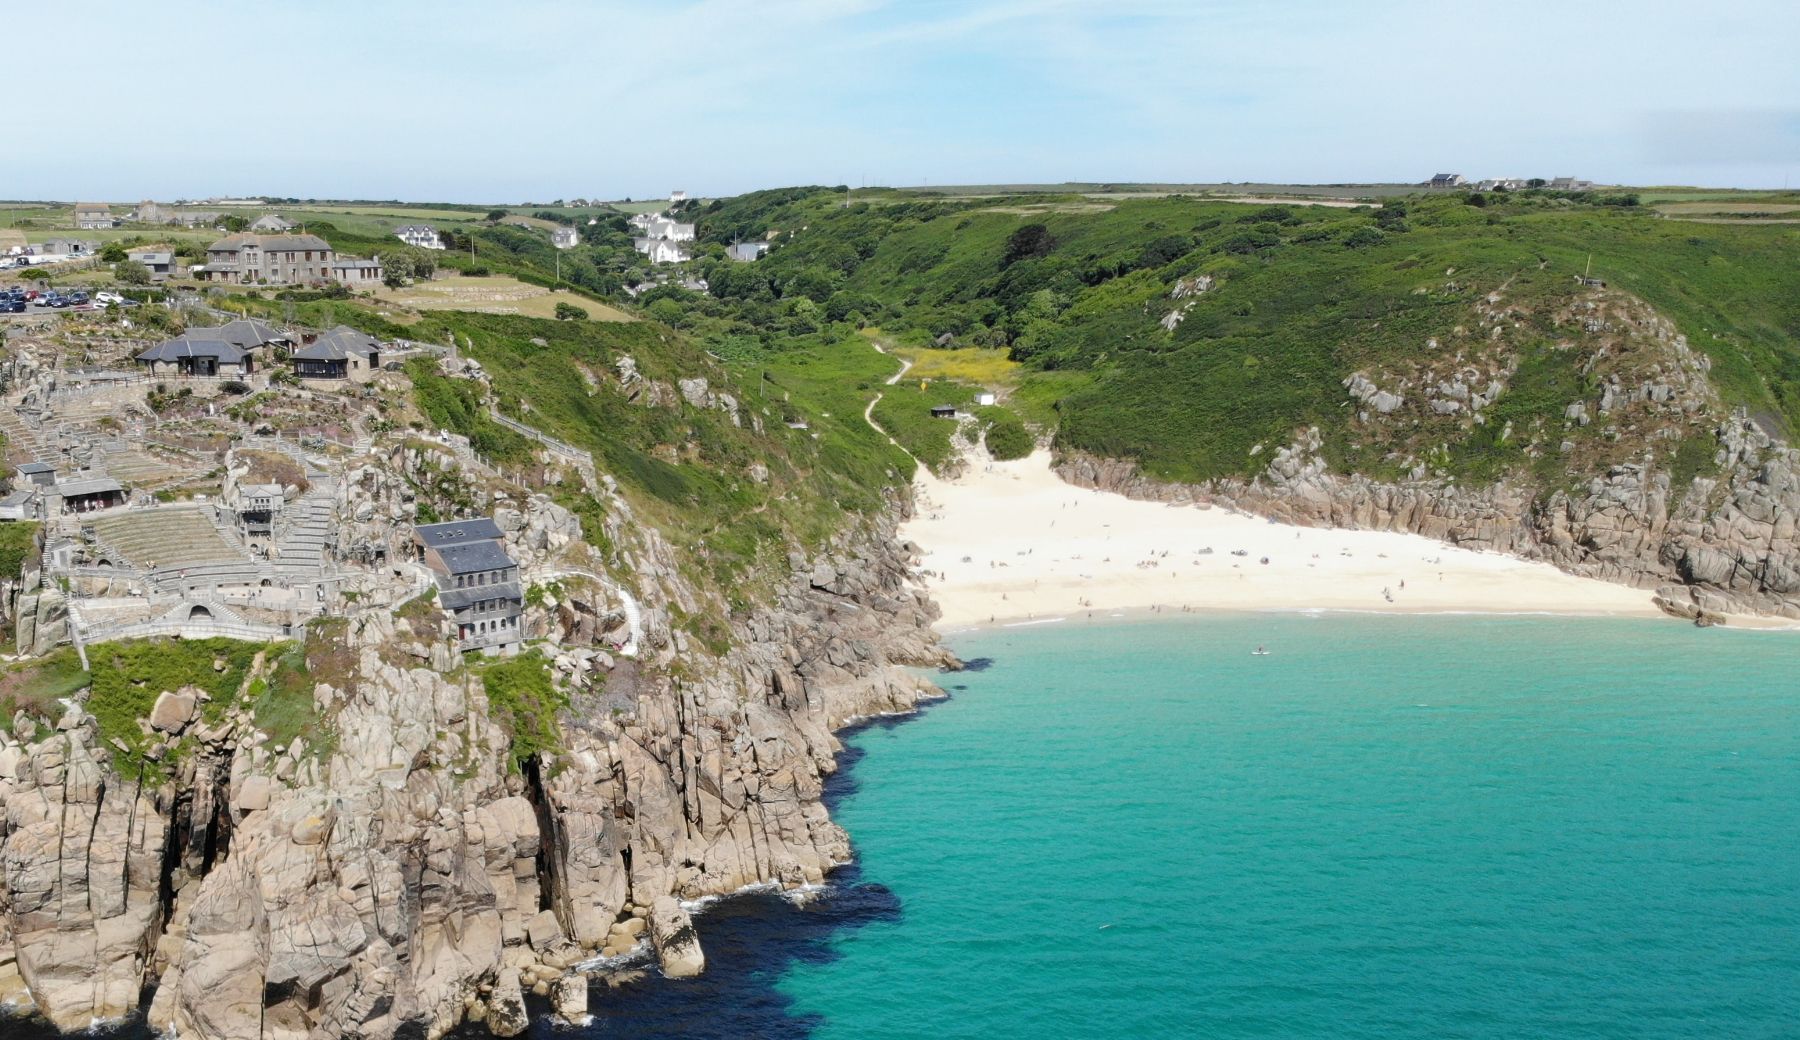 Cornwall beaches - aerial view of Porthcurno